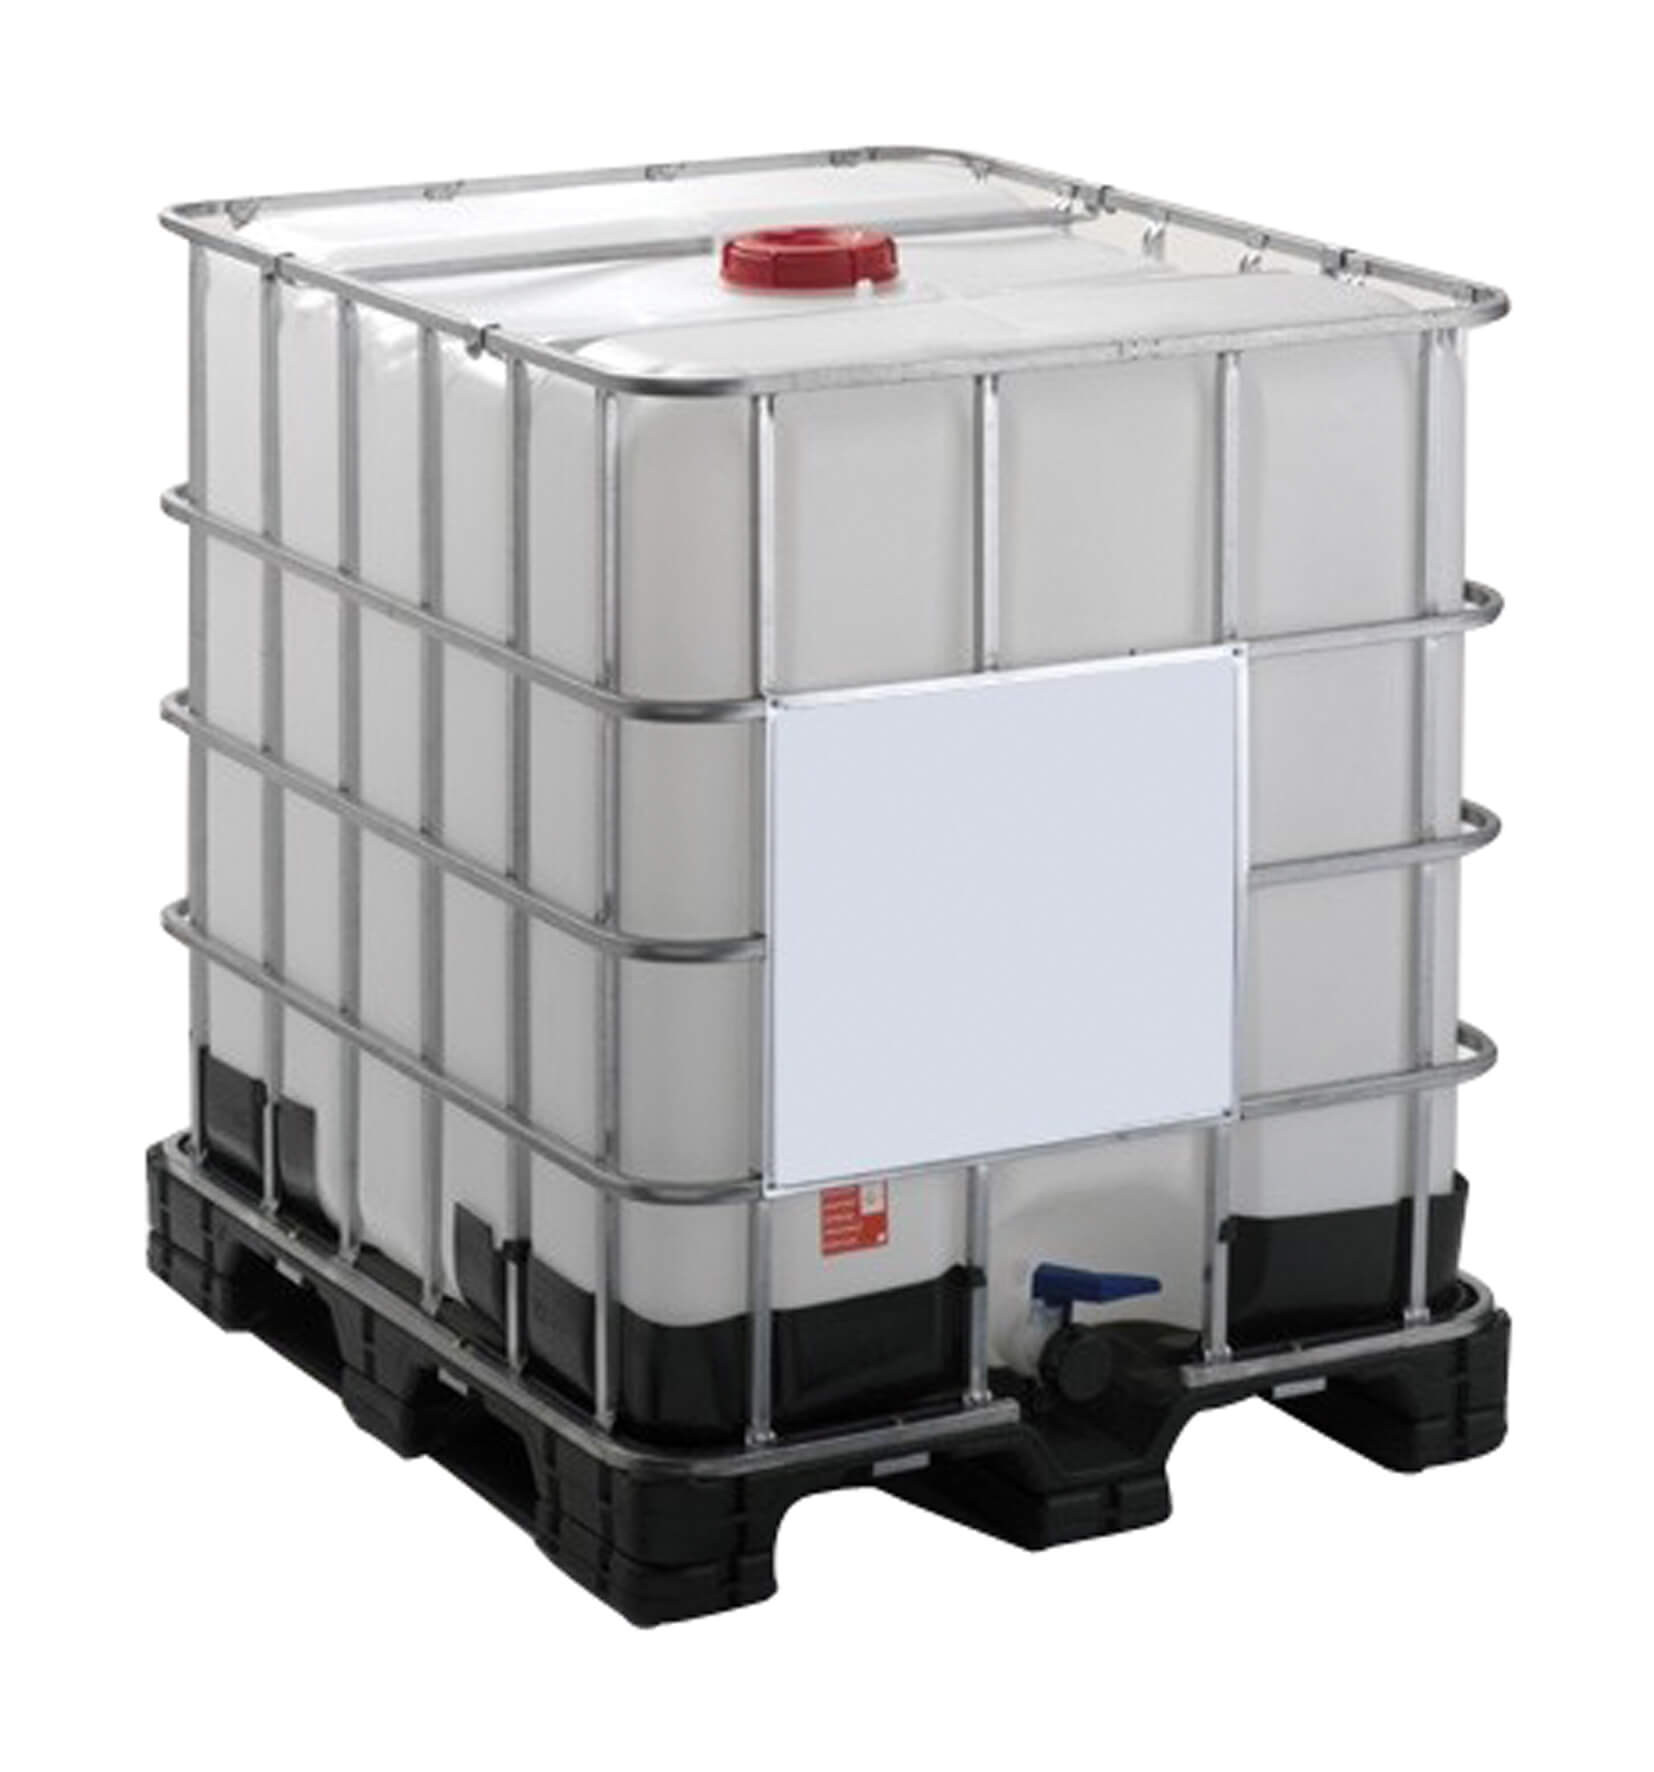 1000-Liter-Container from GRAF